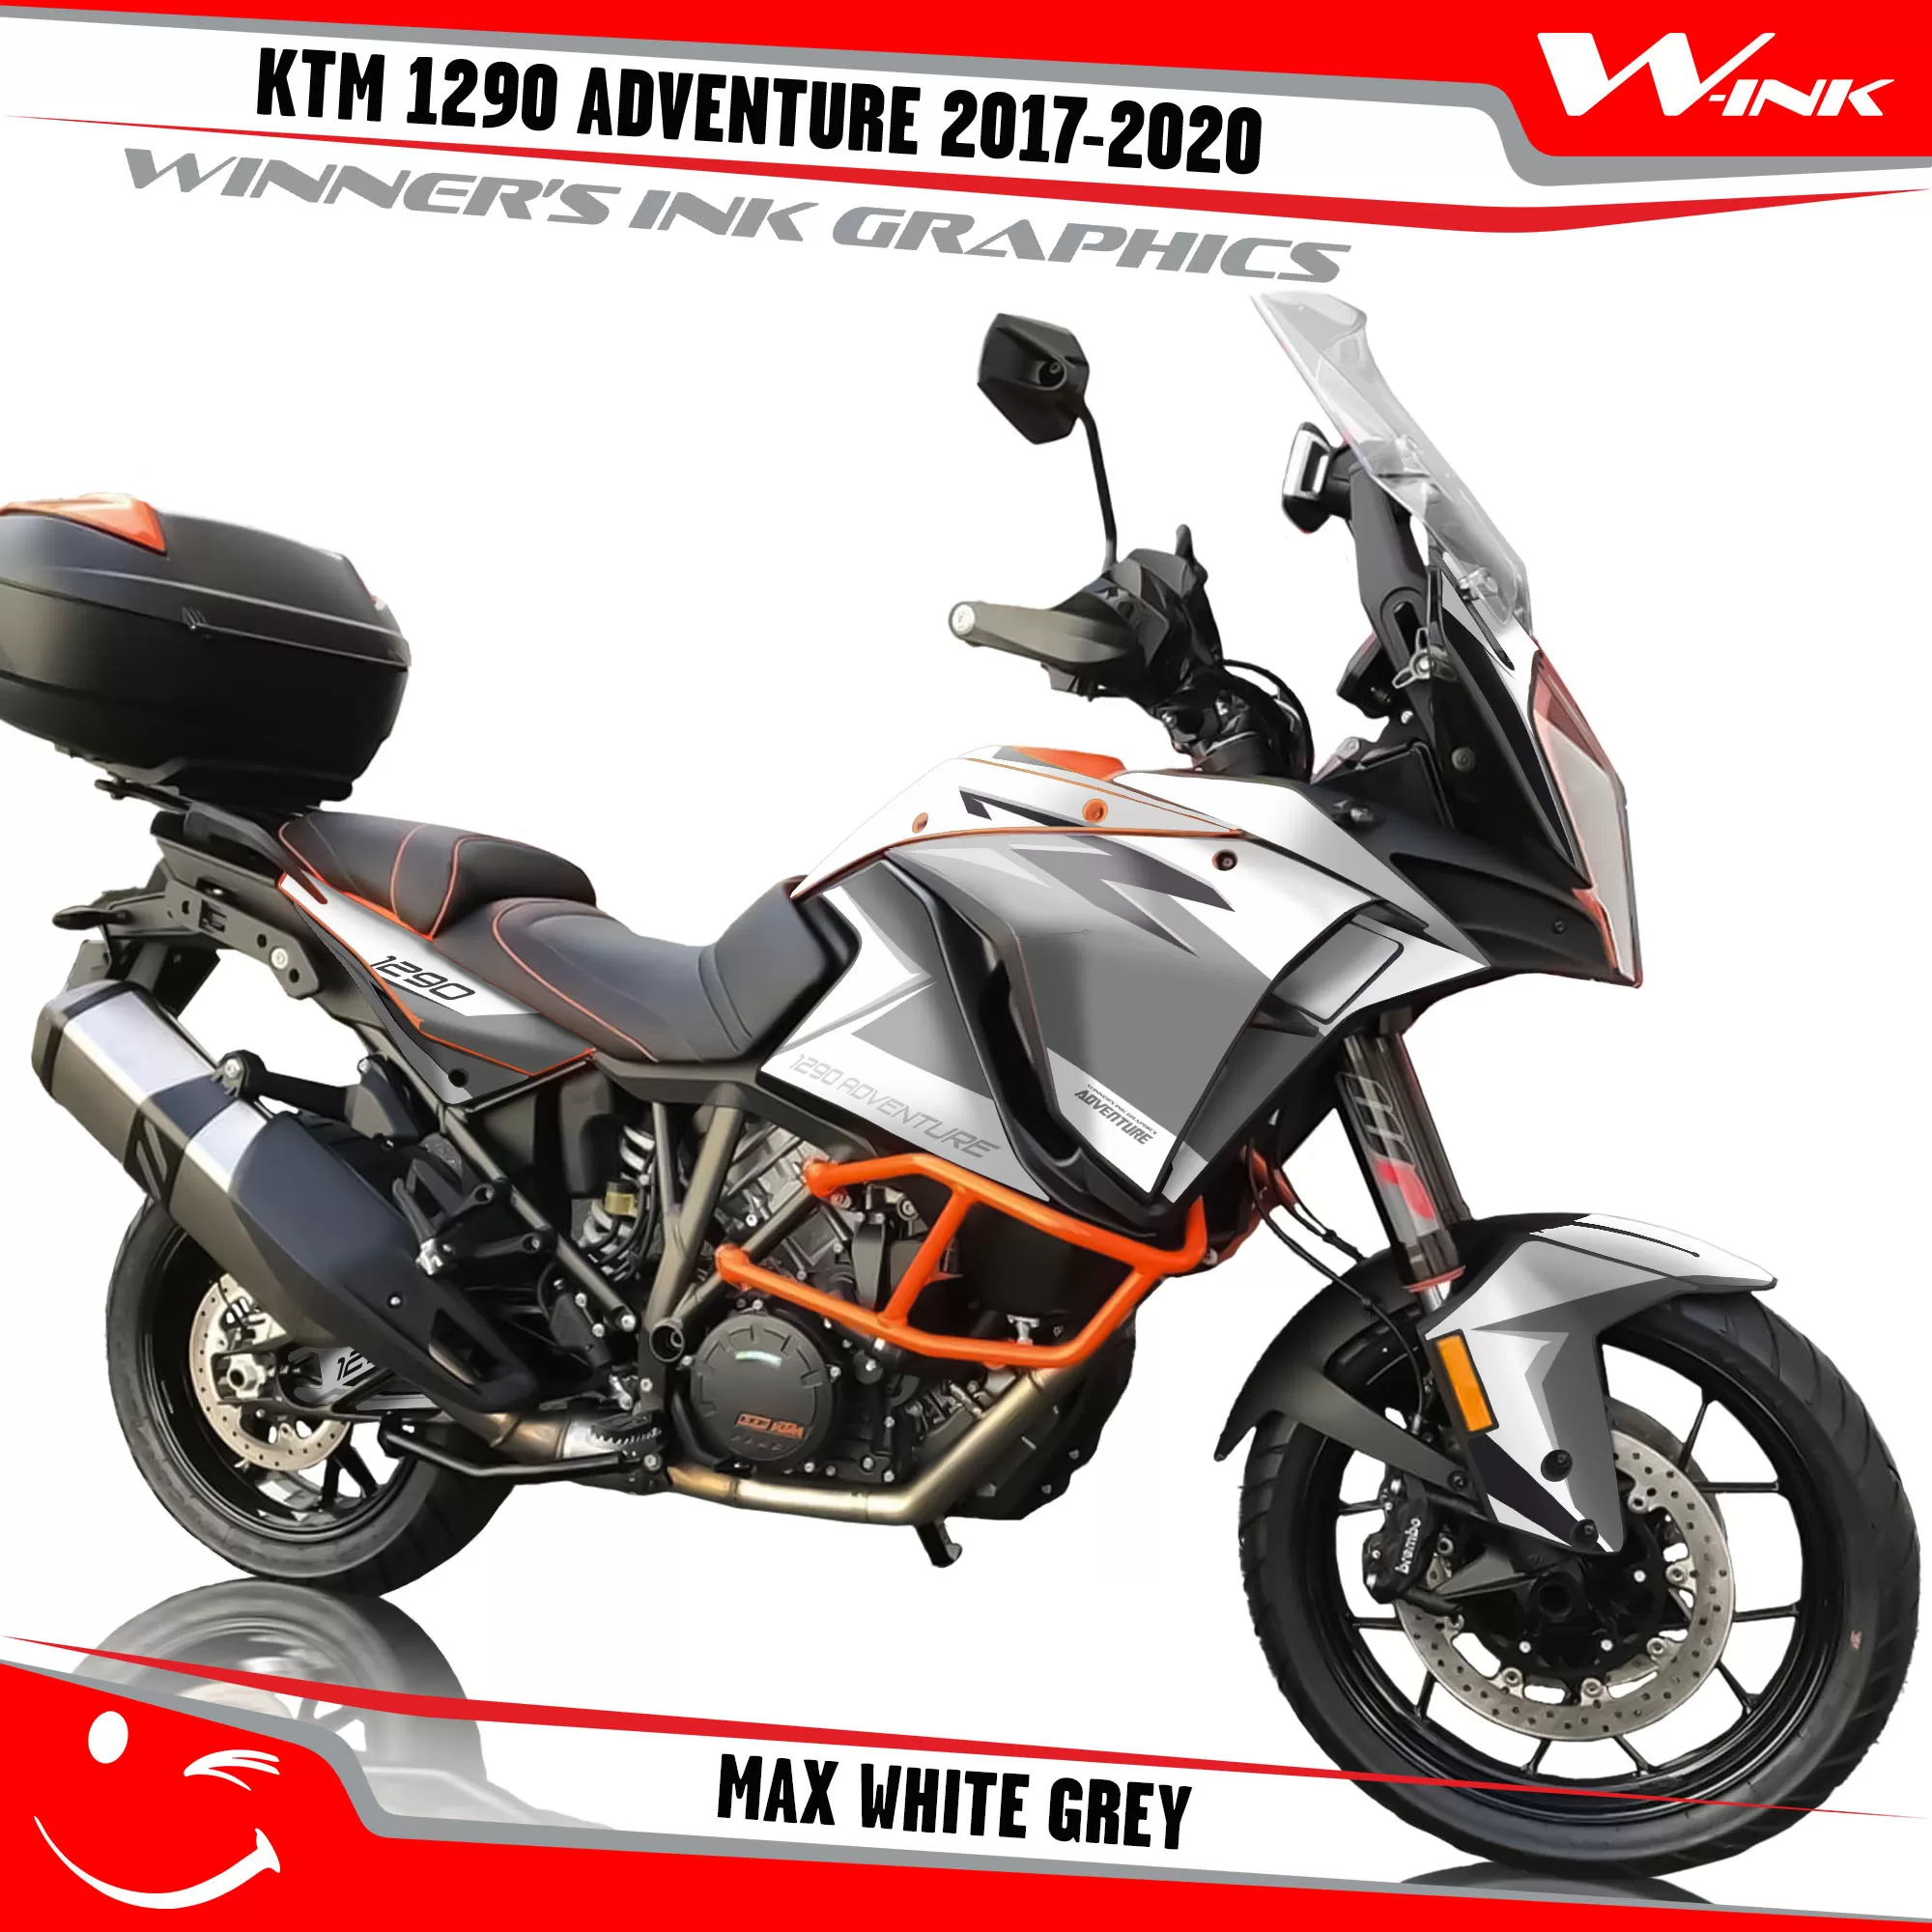 KTM-Adventure-1290-2017-2018-2019-2020-graphics-kit-and-decals-Max-White-Grey